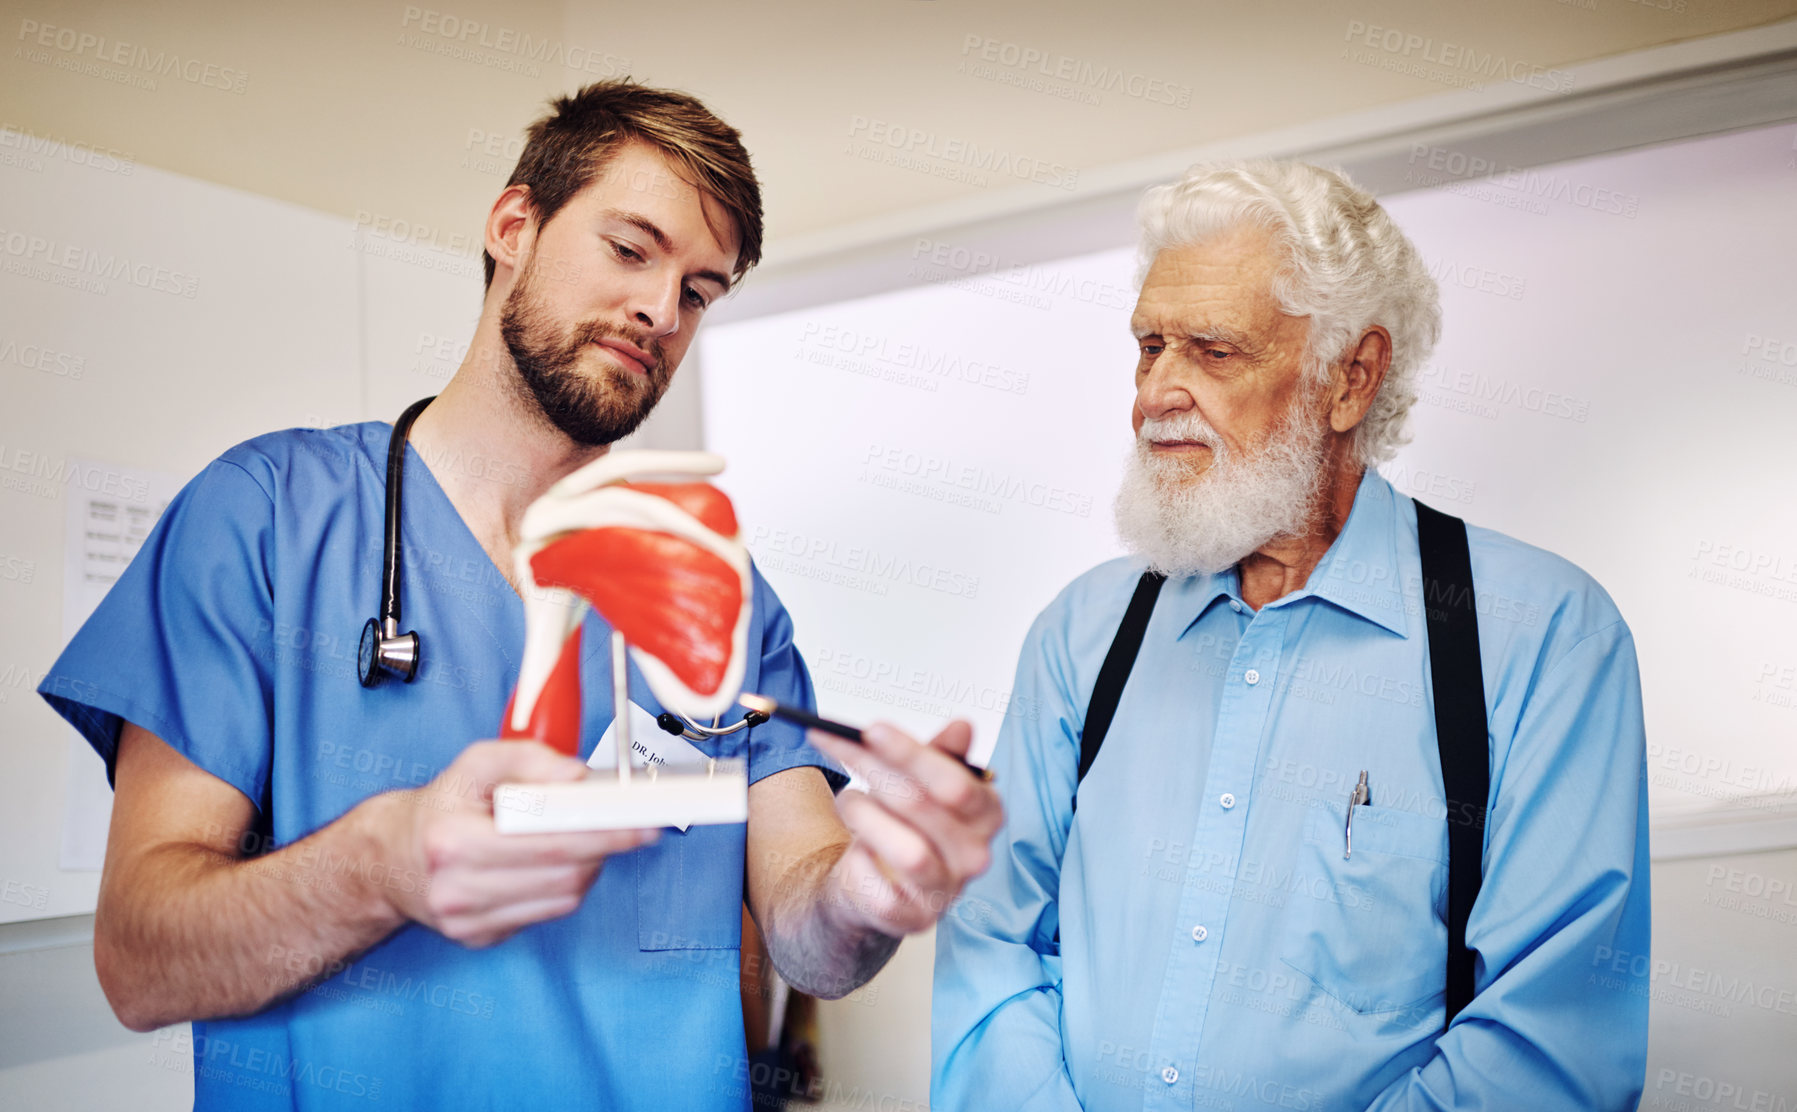 Buy stock photo Shot of a young doctor using a model to explain a diagnosis to his senior patient